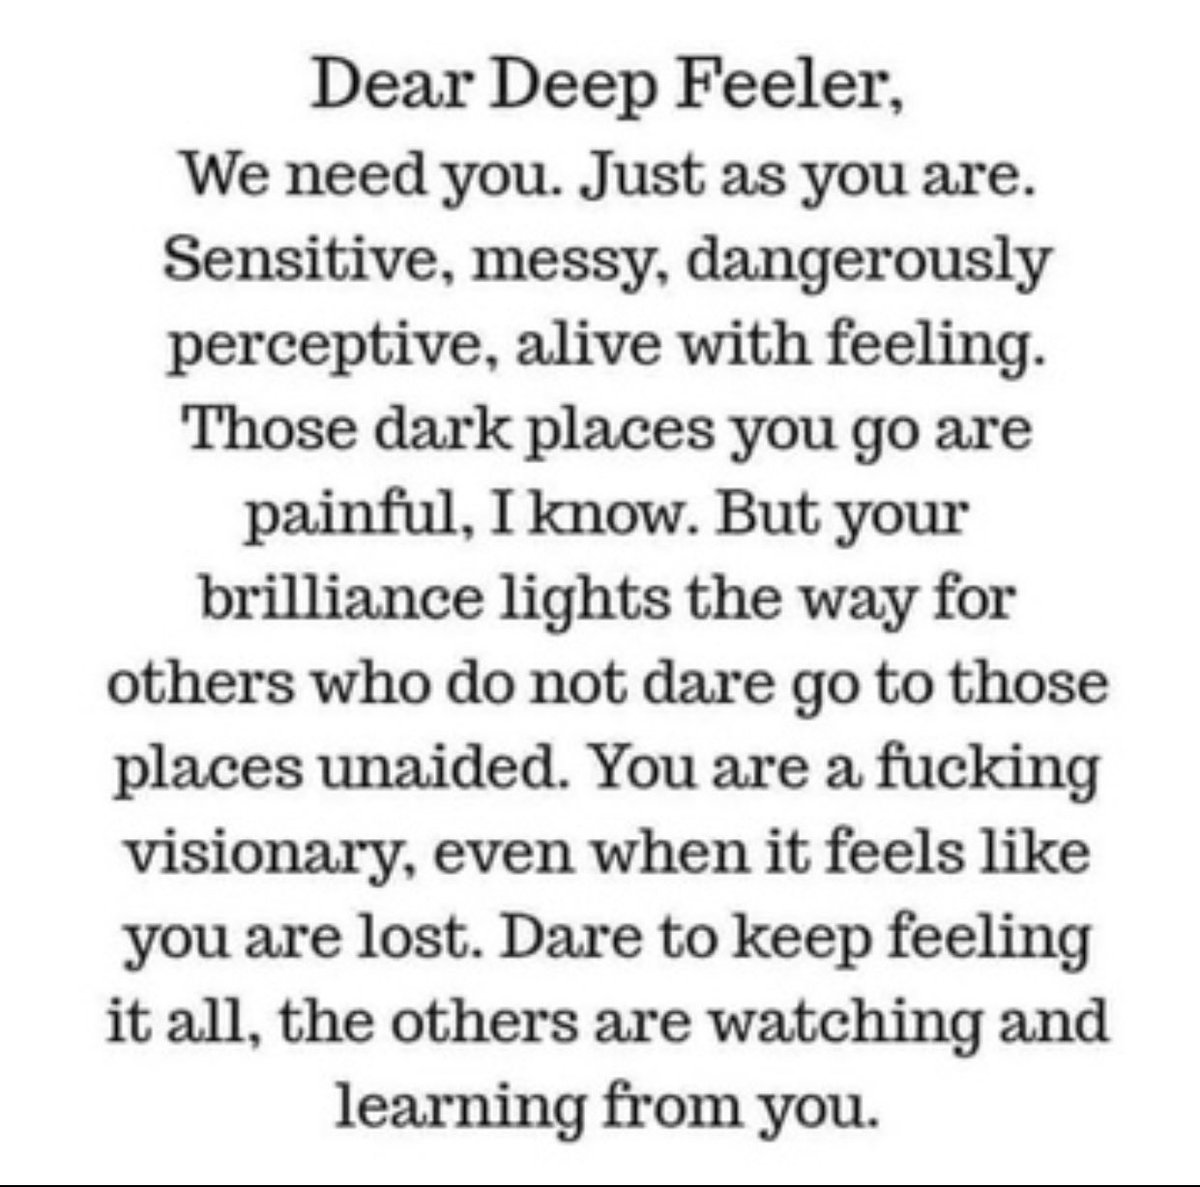 #KeepFighting #TruthBeTold #Truth #Lies #Betrayal #Retaliation #Destructive #NarcissismAttraction #AllAboutMe #AllAboutYou #Answers #DeadSoul #Heartless #TinMan #Oz #REALITY #Lost 💔